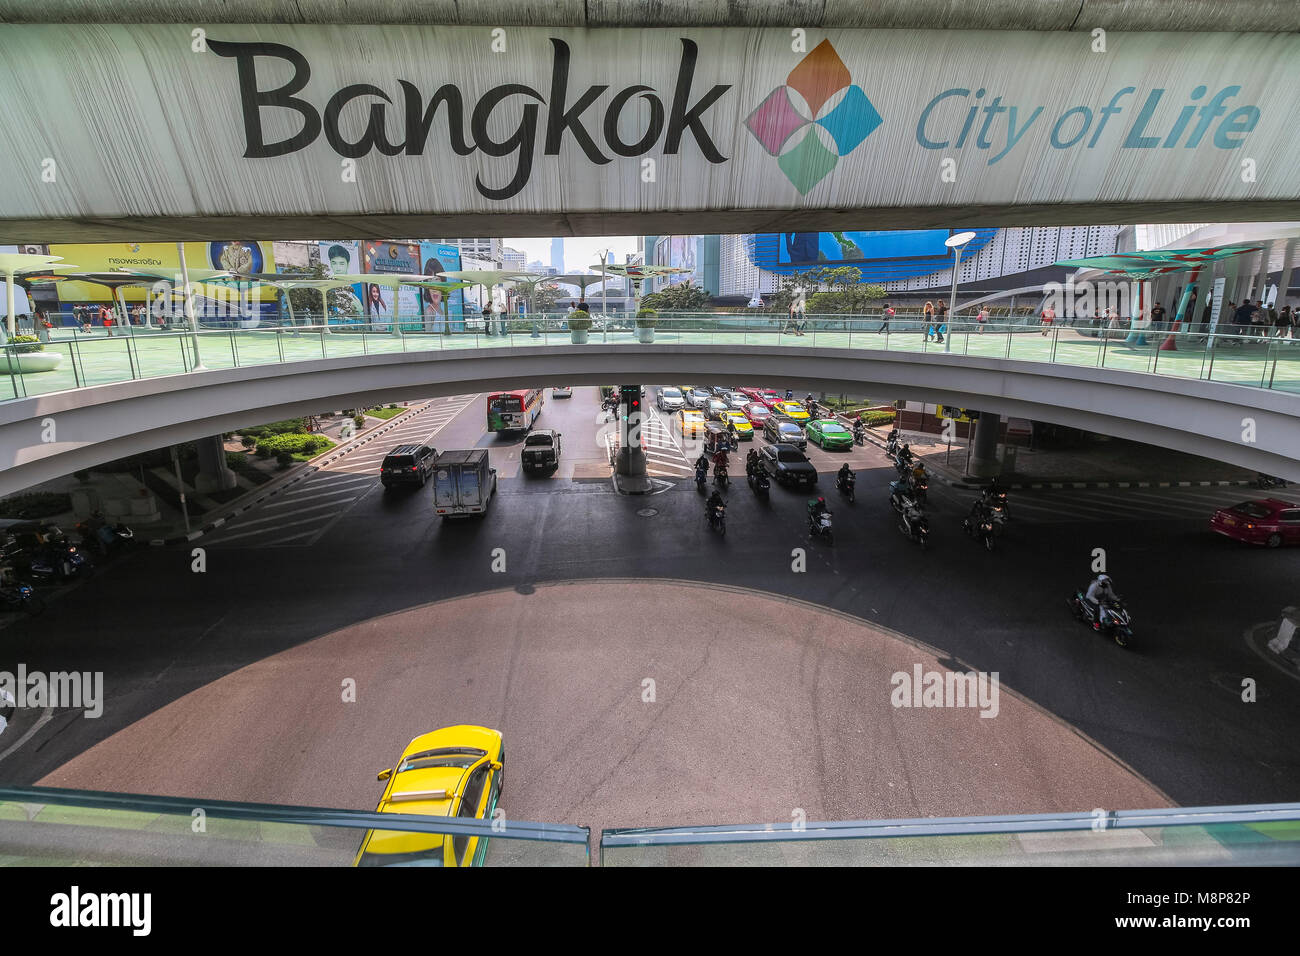 Bangkok City of life sign above the street in Thailand Stock Photo